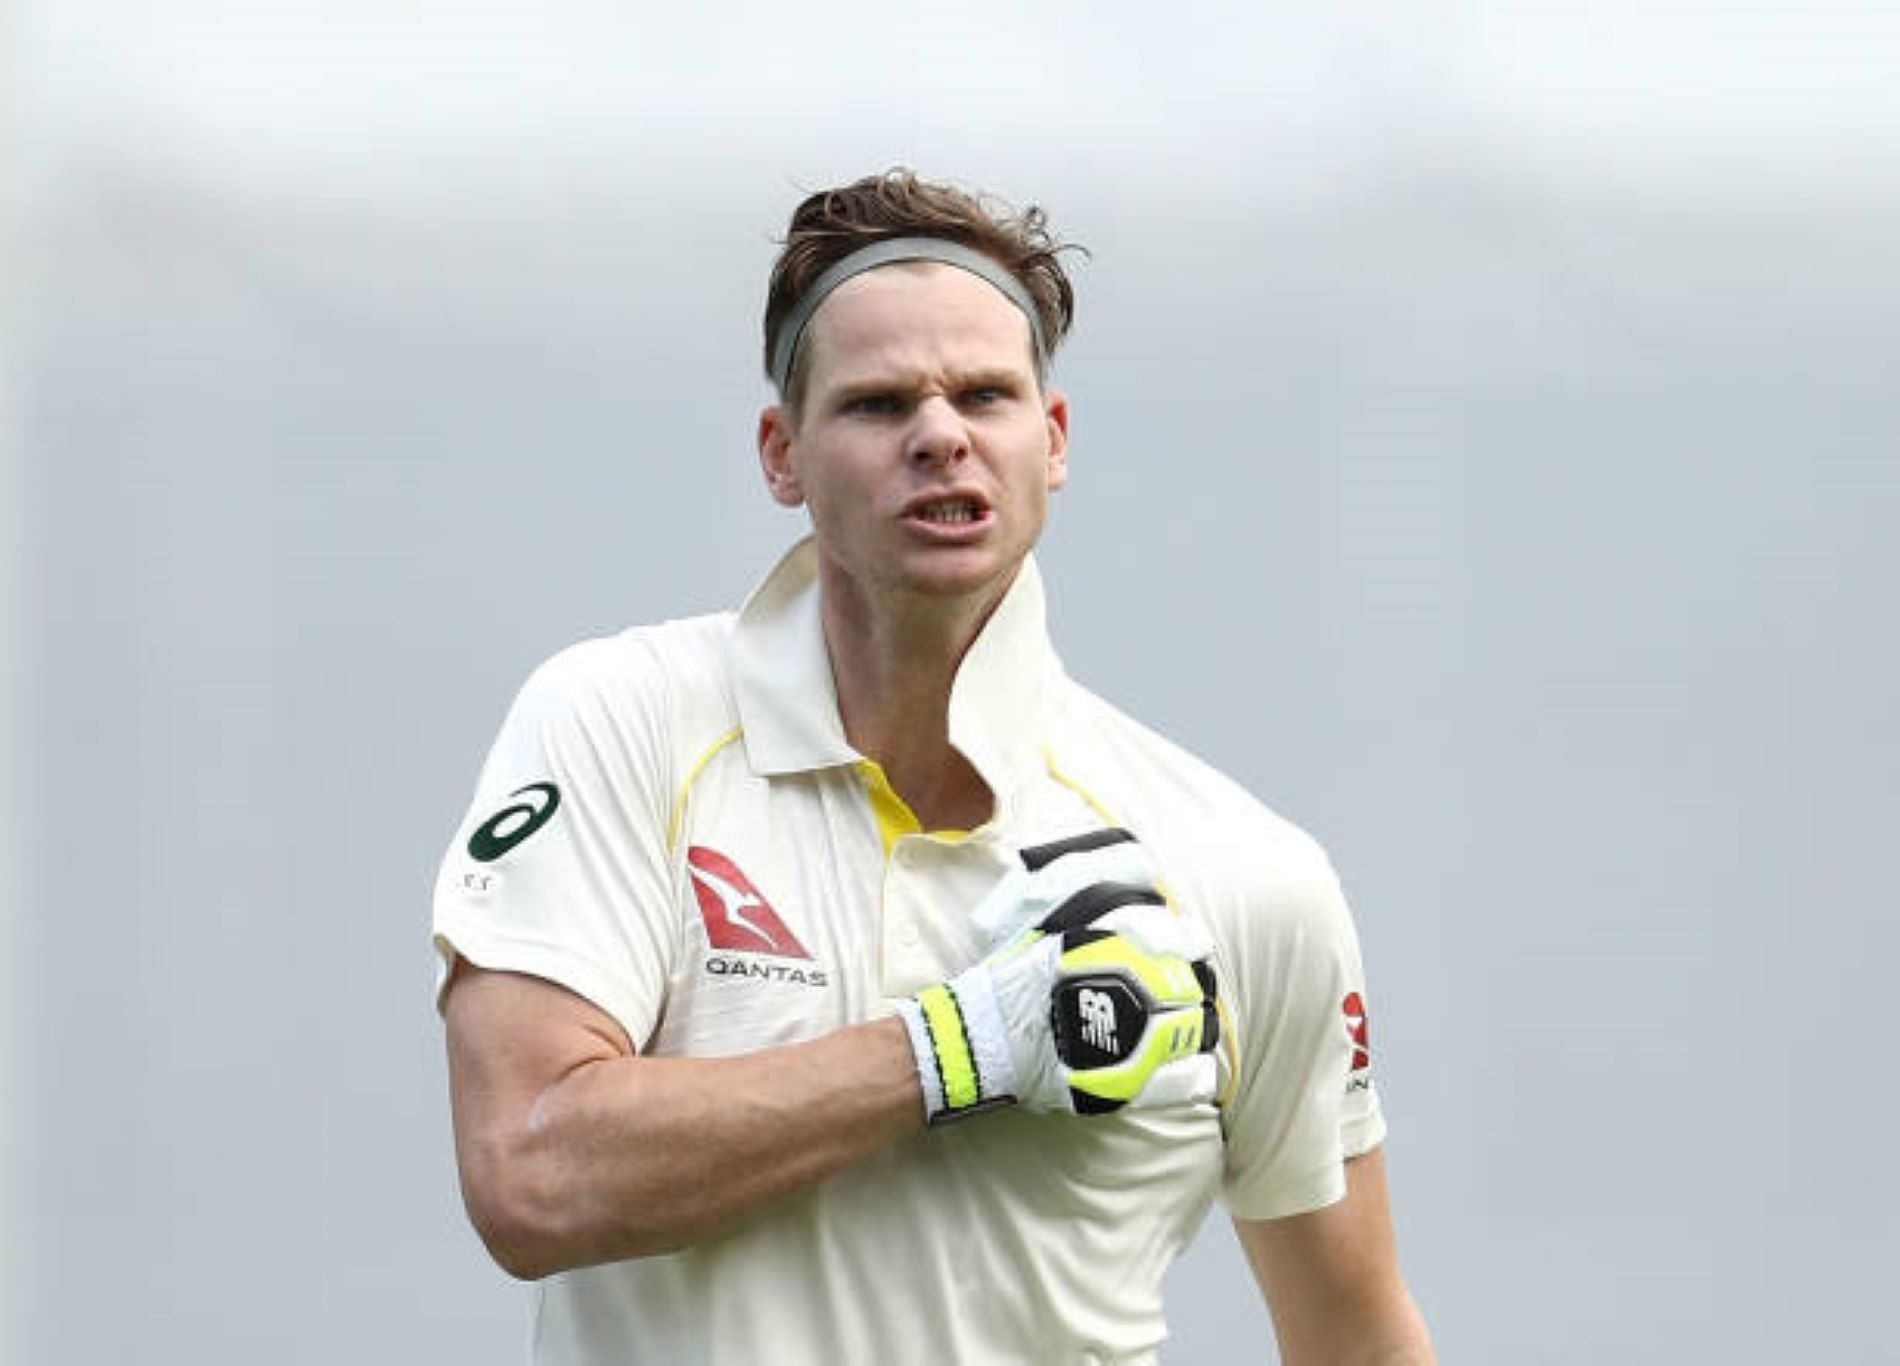 Steve Smith looks to replicate his heroics from the 2019 Ashes